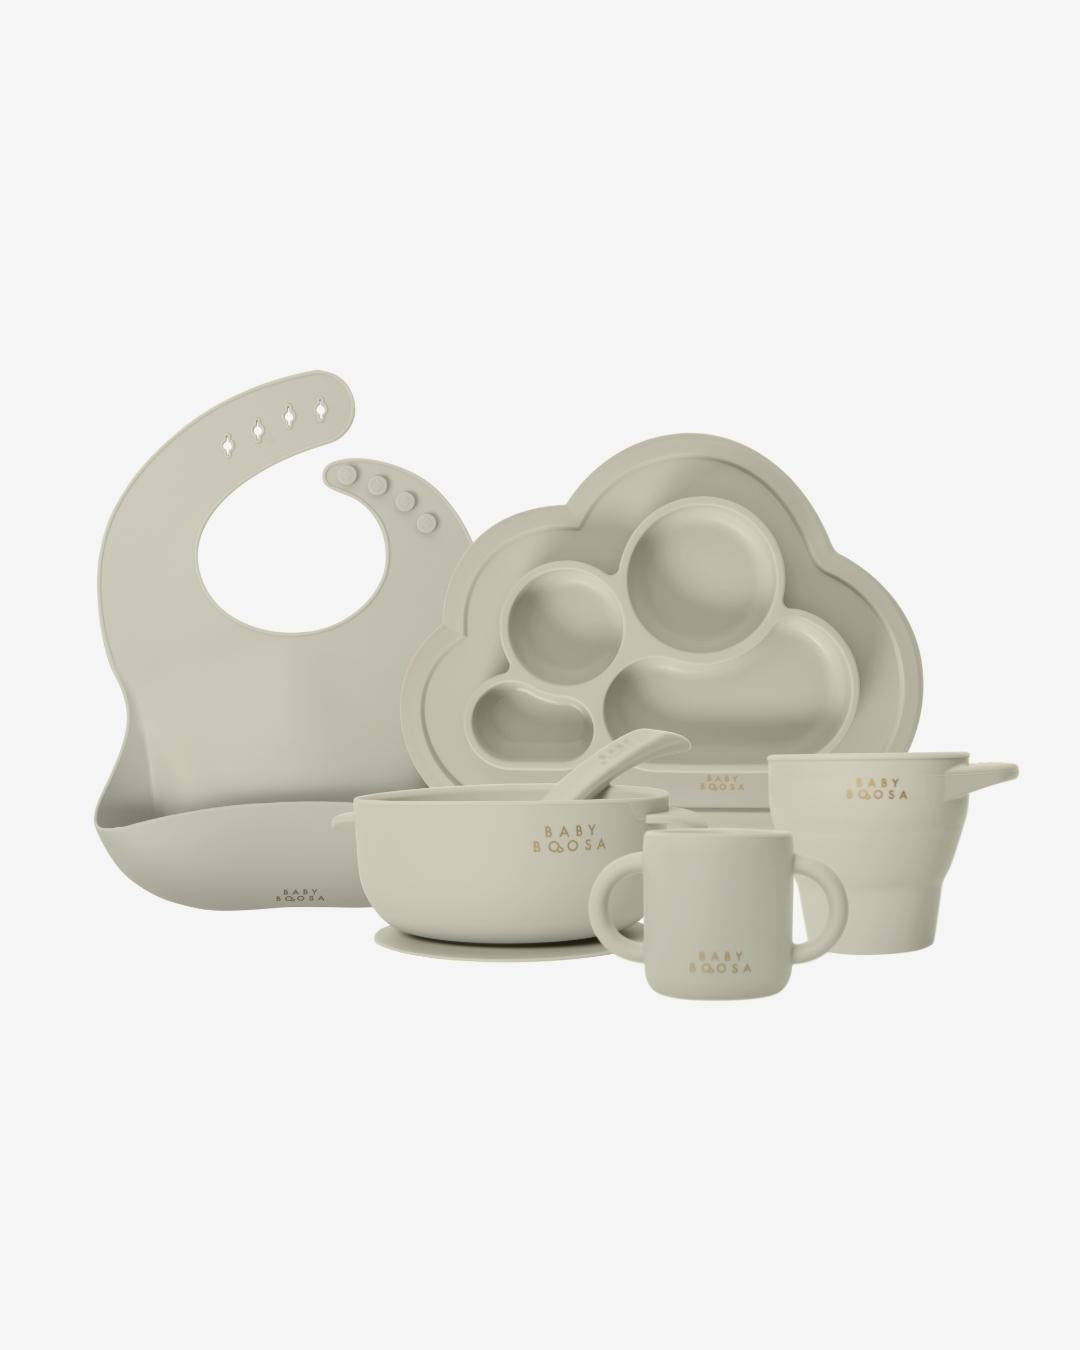 Weaning Gift Set | Luxe Silicone | All you need Essentials | Mess-Free | Grippy non-slip suction | Easy Clean | Dentist Developed (Salted Caramel) - £80 Value